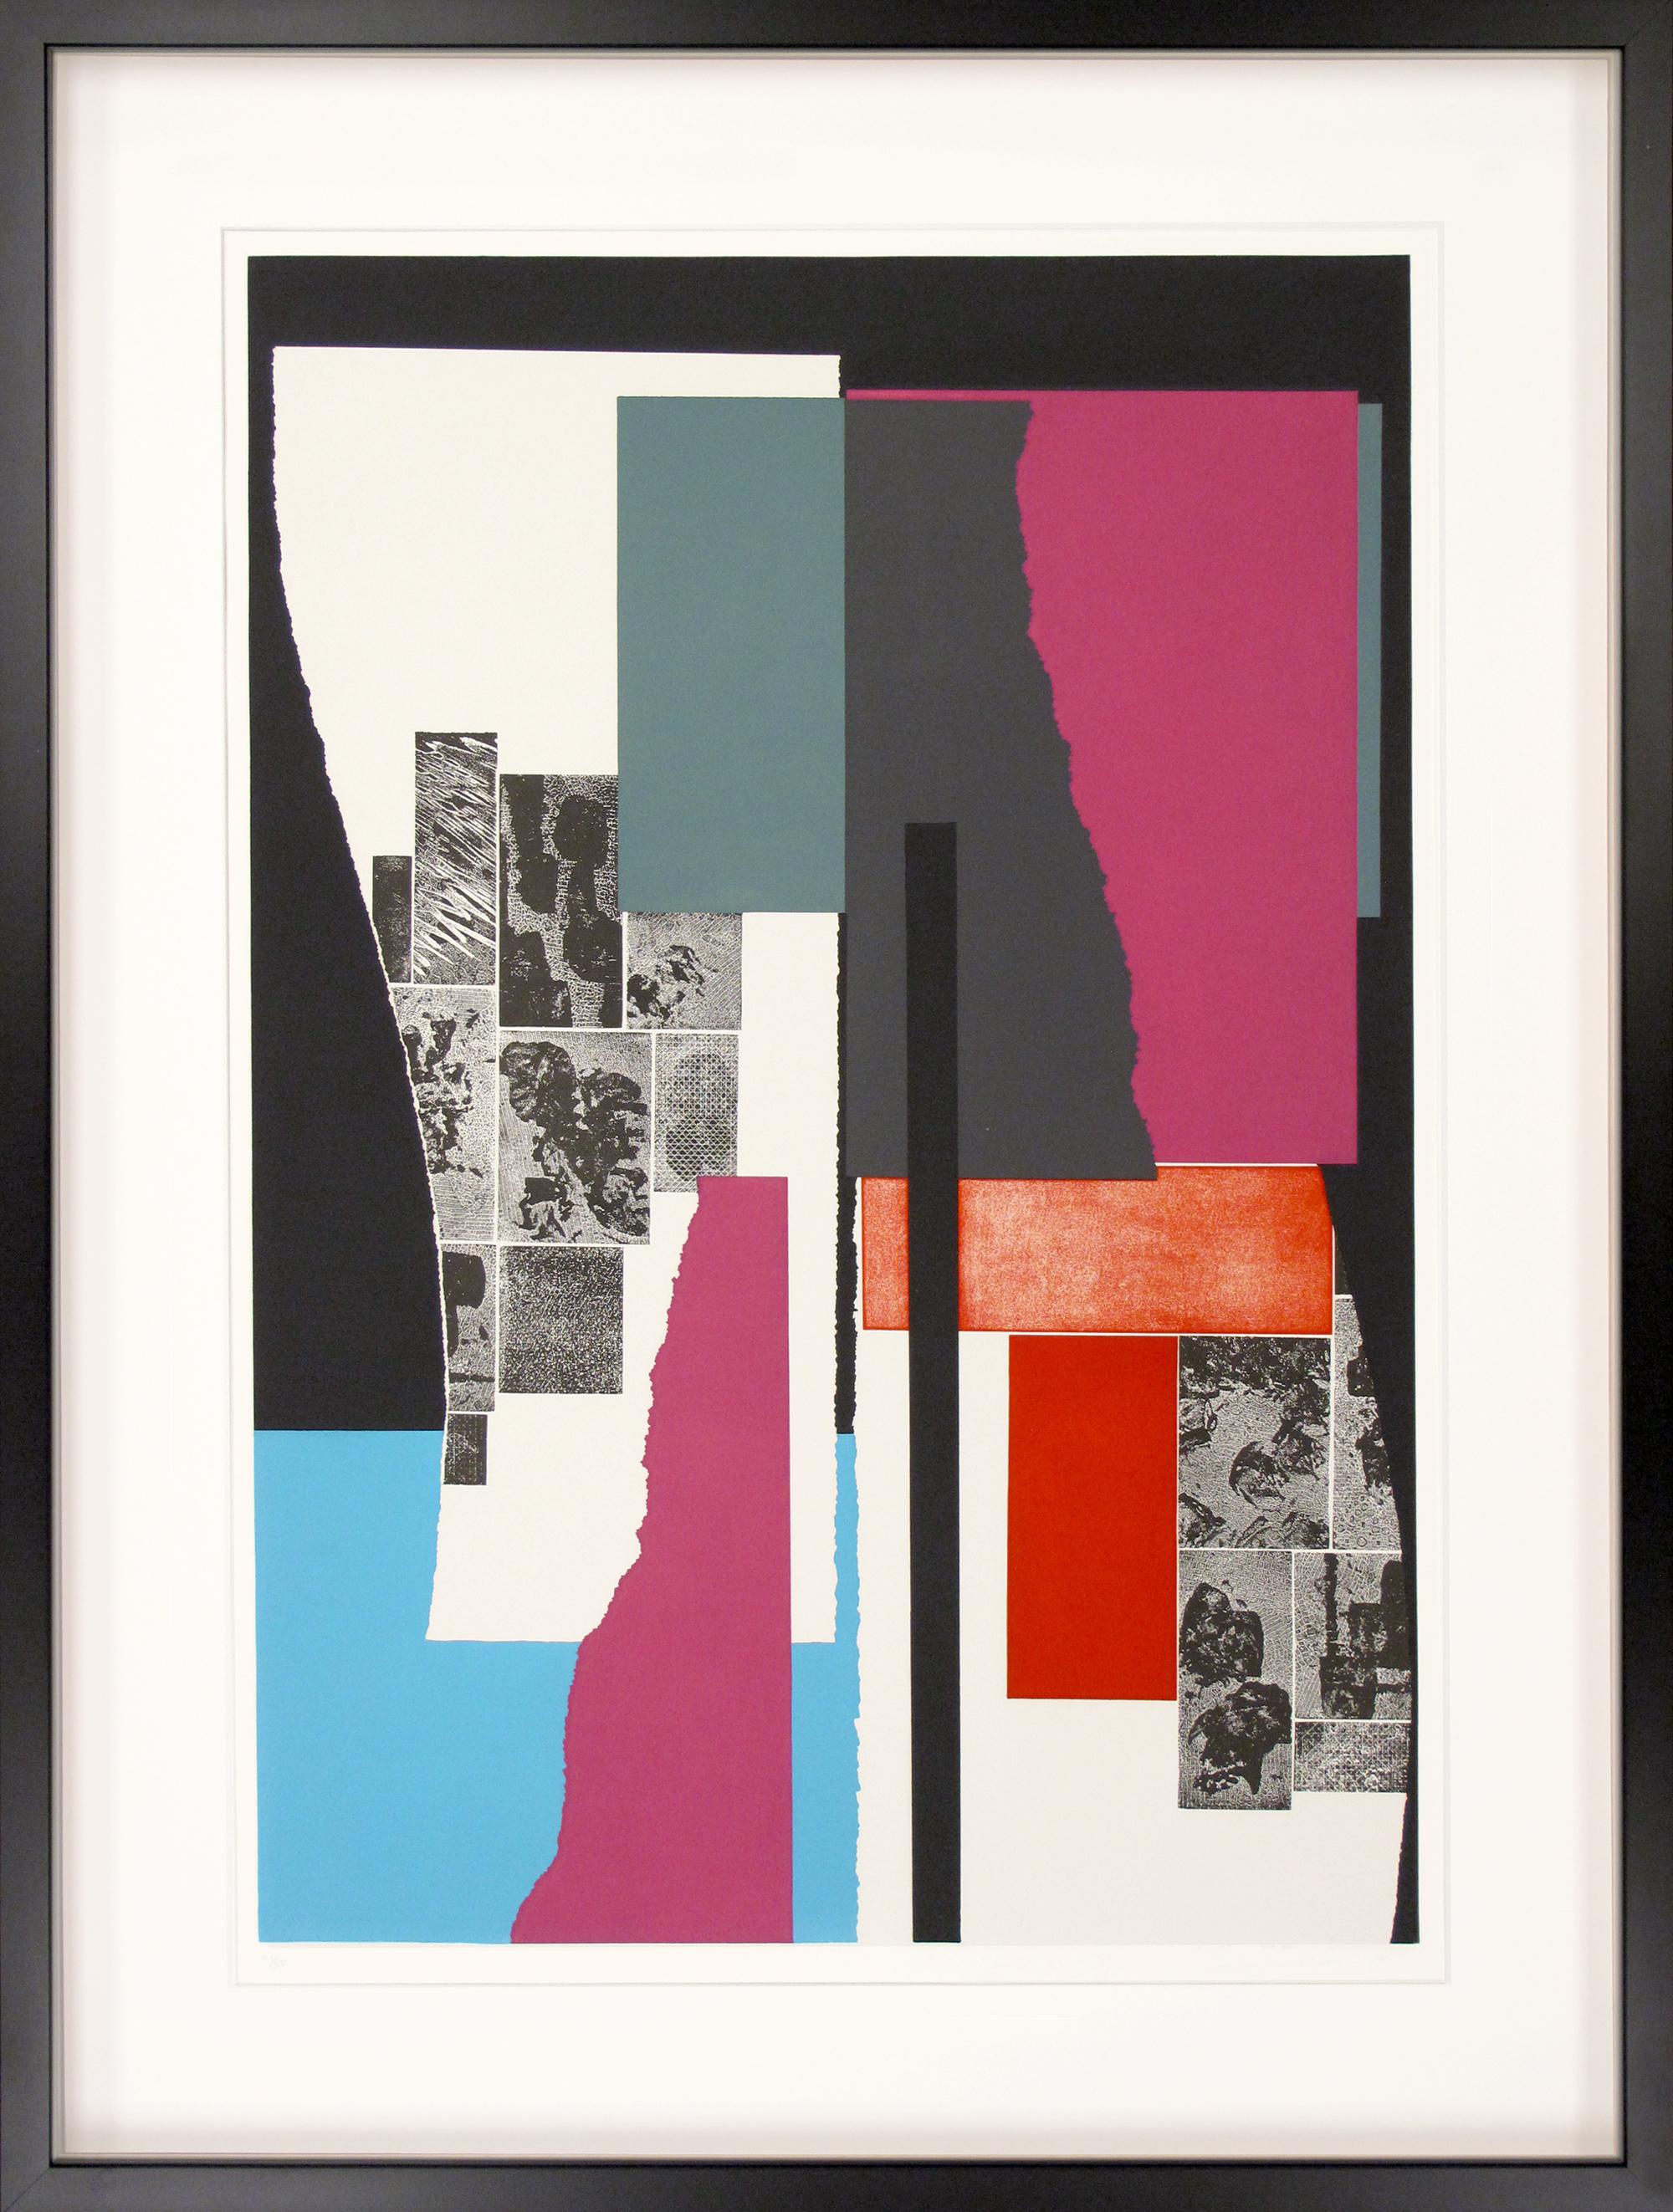 Louise Nevelson
"Celebration #4"

Aquatint in colors on Arches paper, 1979
Signed, dated, titled, and numbered in pencil lower margin
This impression is 41 of an edition of 50 
Sheet Size:  38 7/8” x 27 3/8”
Published by Pace Prints, Inc.

Louise